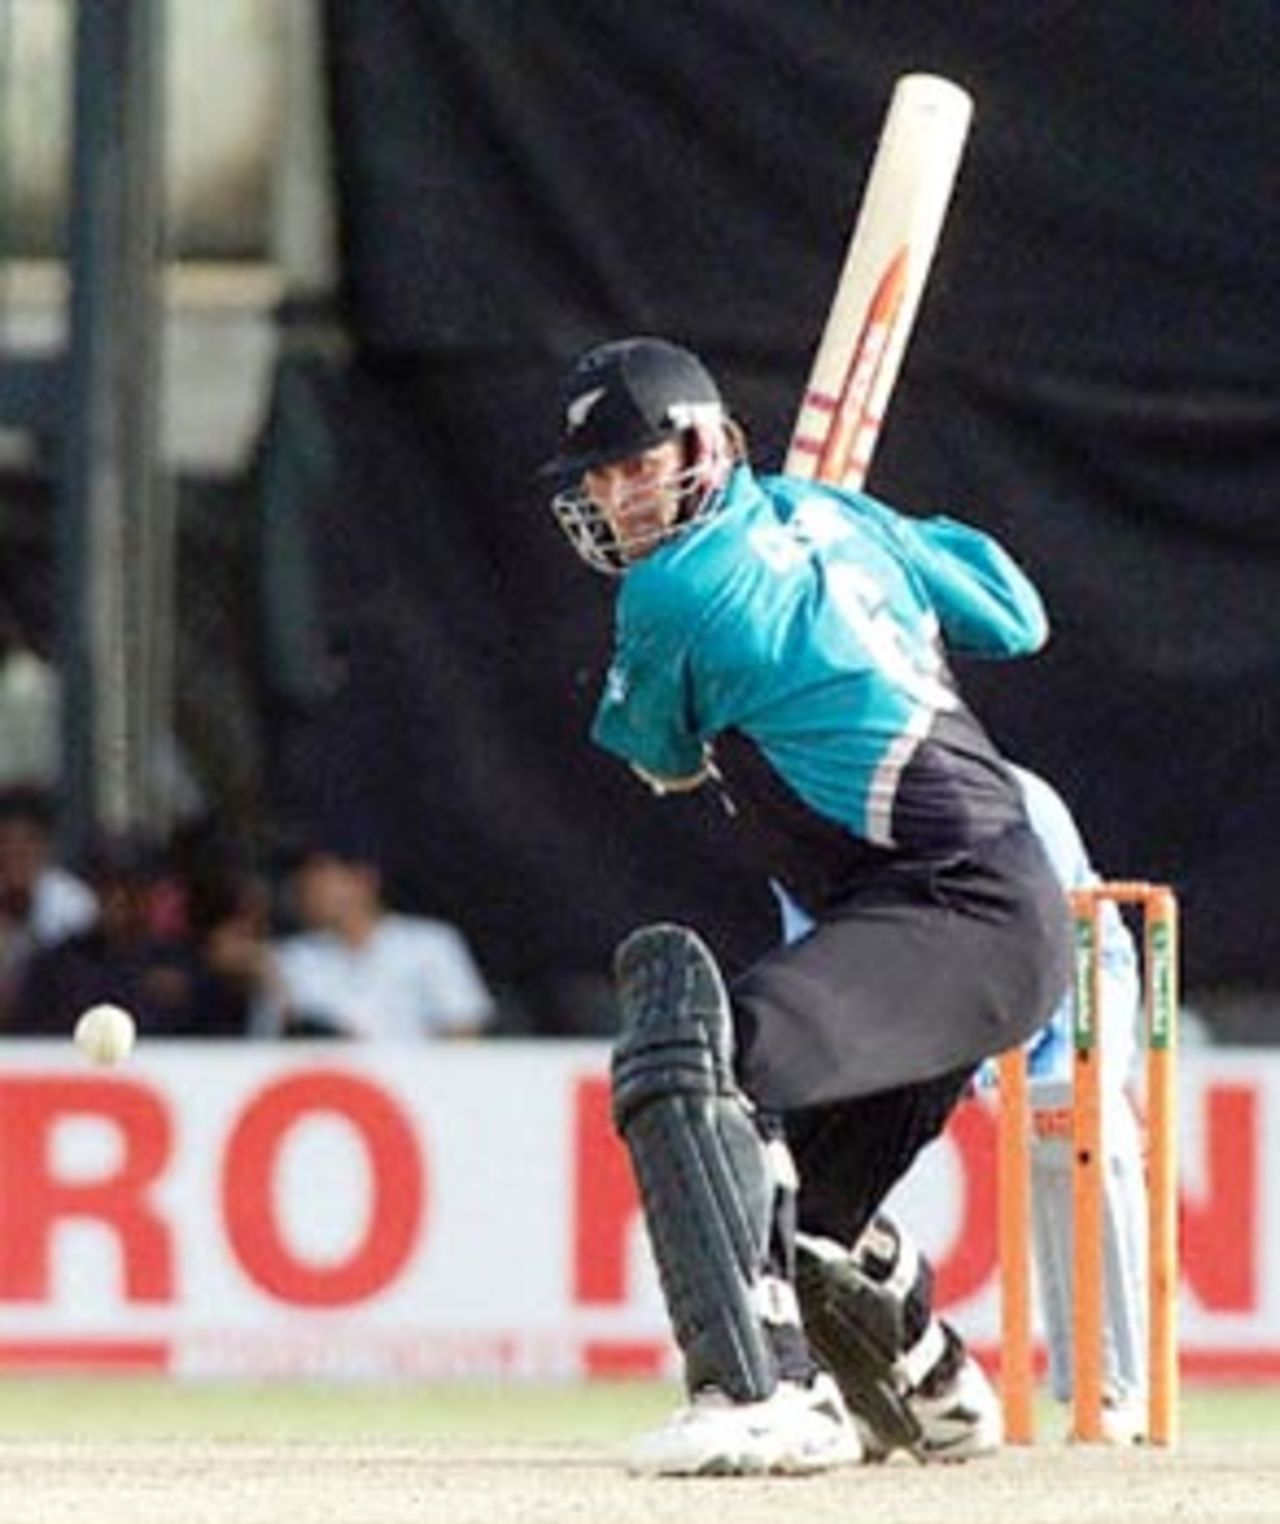 Centurion Cairns sets himself to heave the ball over the infield. ICC KnockOut 2000/01, Final, India v New Zealand, Gymkhana Club Ground, Nairobi 15 October 2000